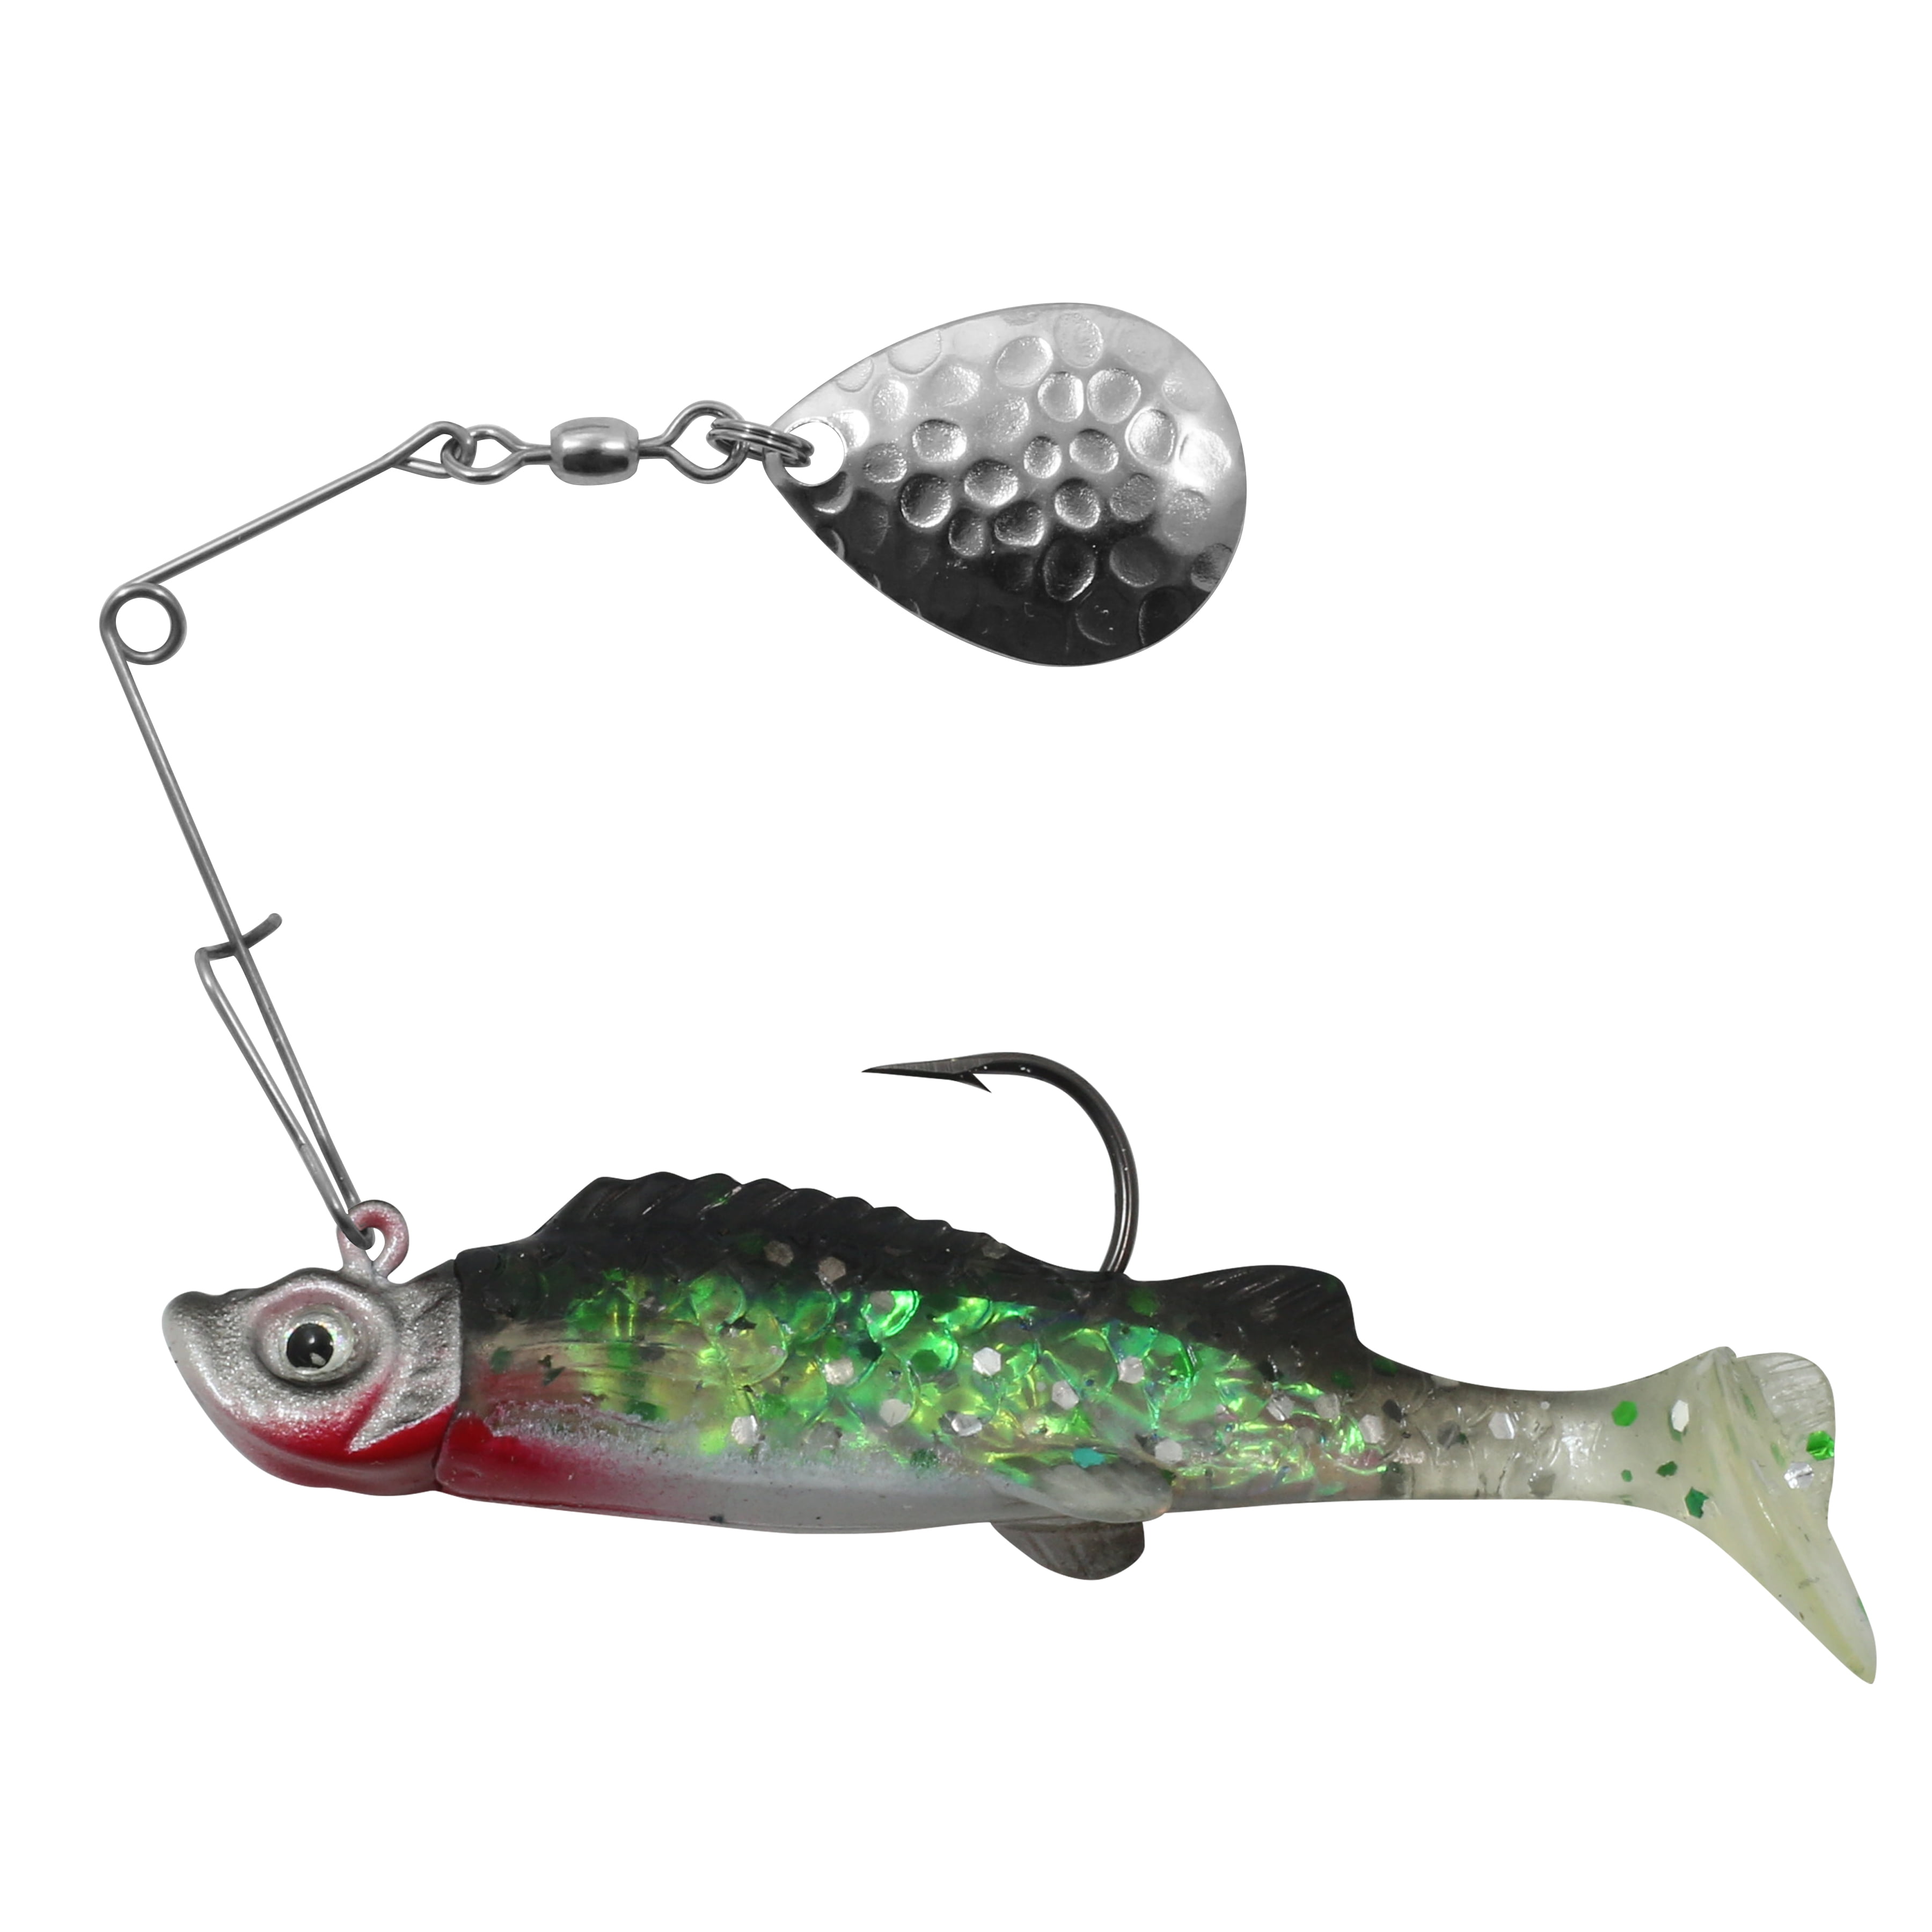 Northland Tackle Mimic Minnow Spin, Spinner Jig and Tail, Freshwater,  Silver Shiner 